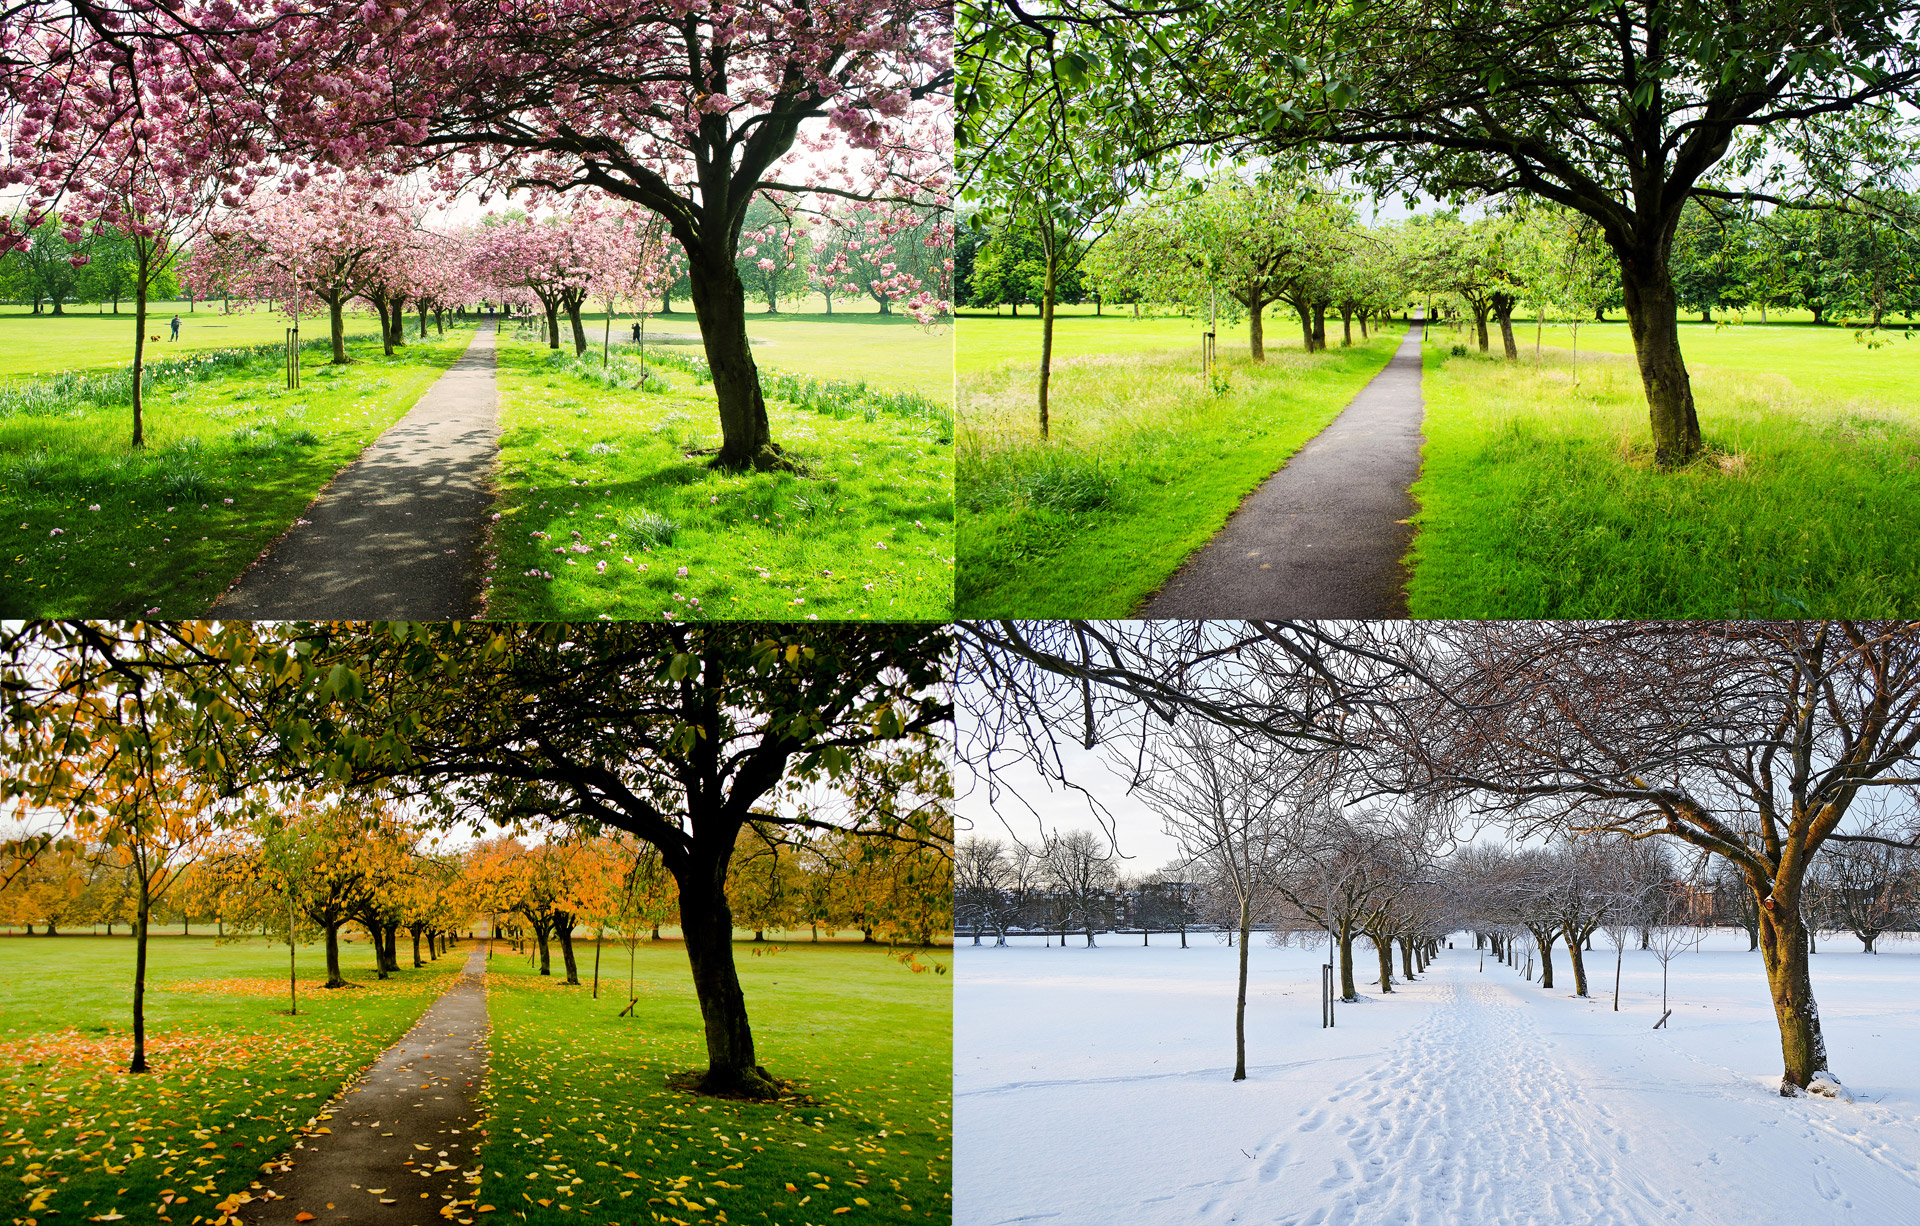 Trees in spring, summer, autumn, and winter